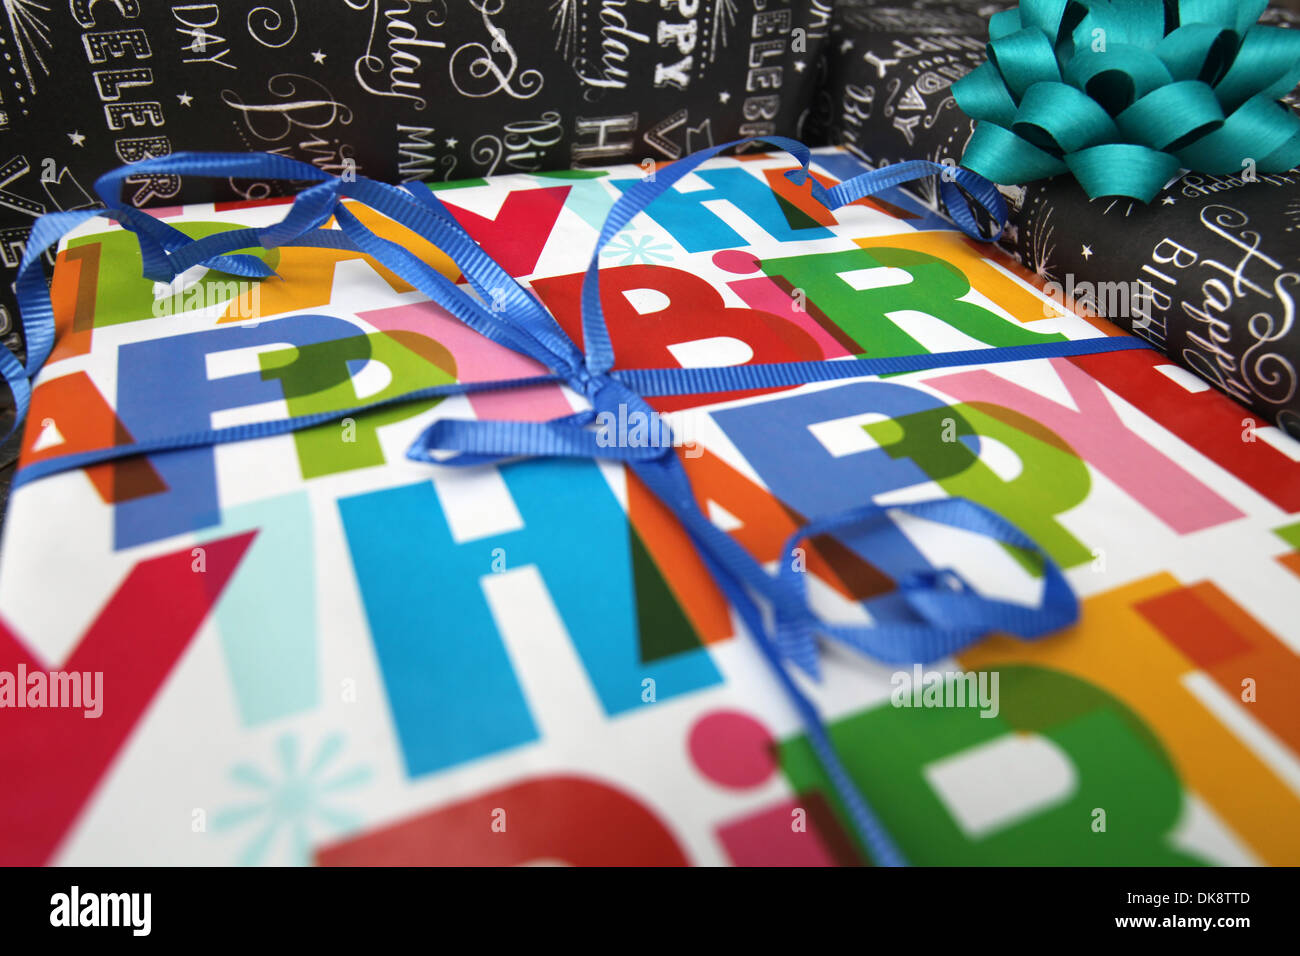 Gift wrapped Birthday presents. Stock Photo